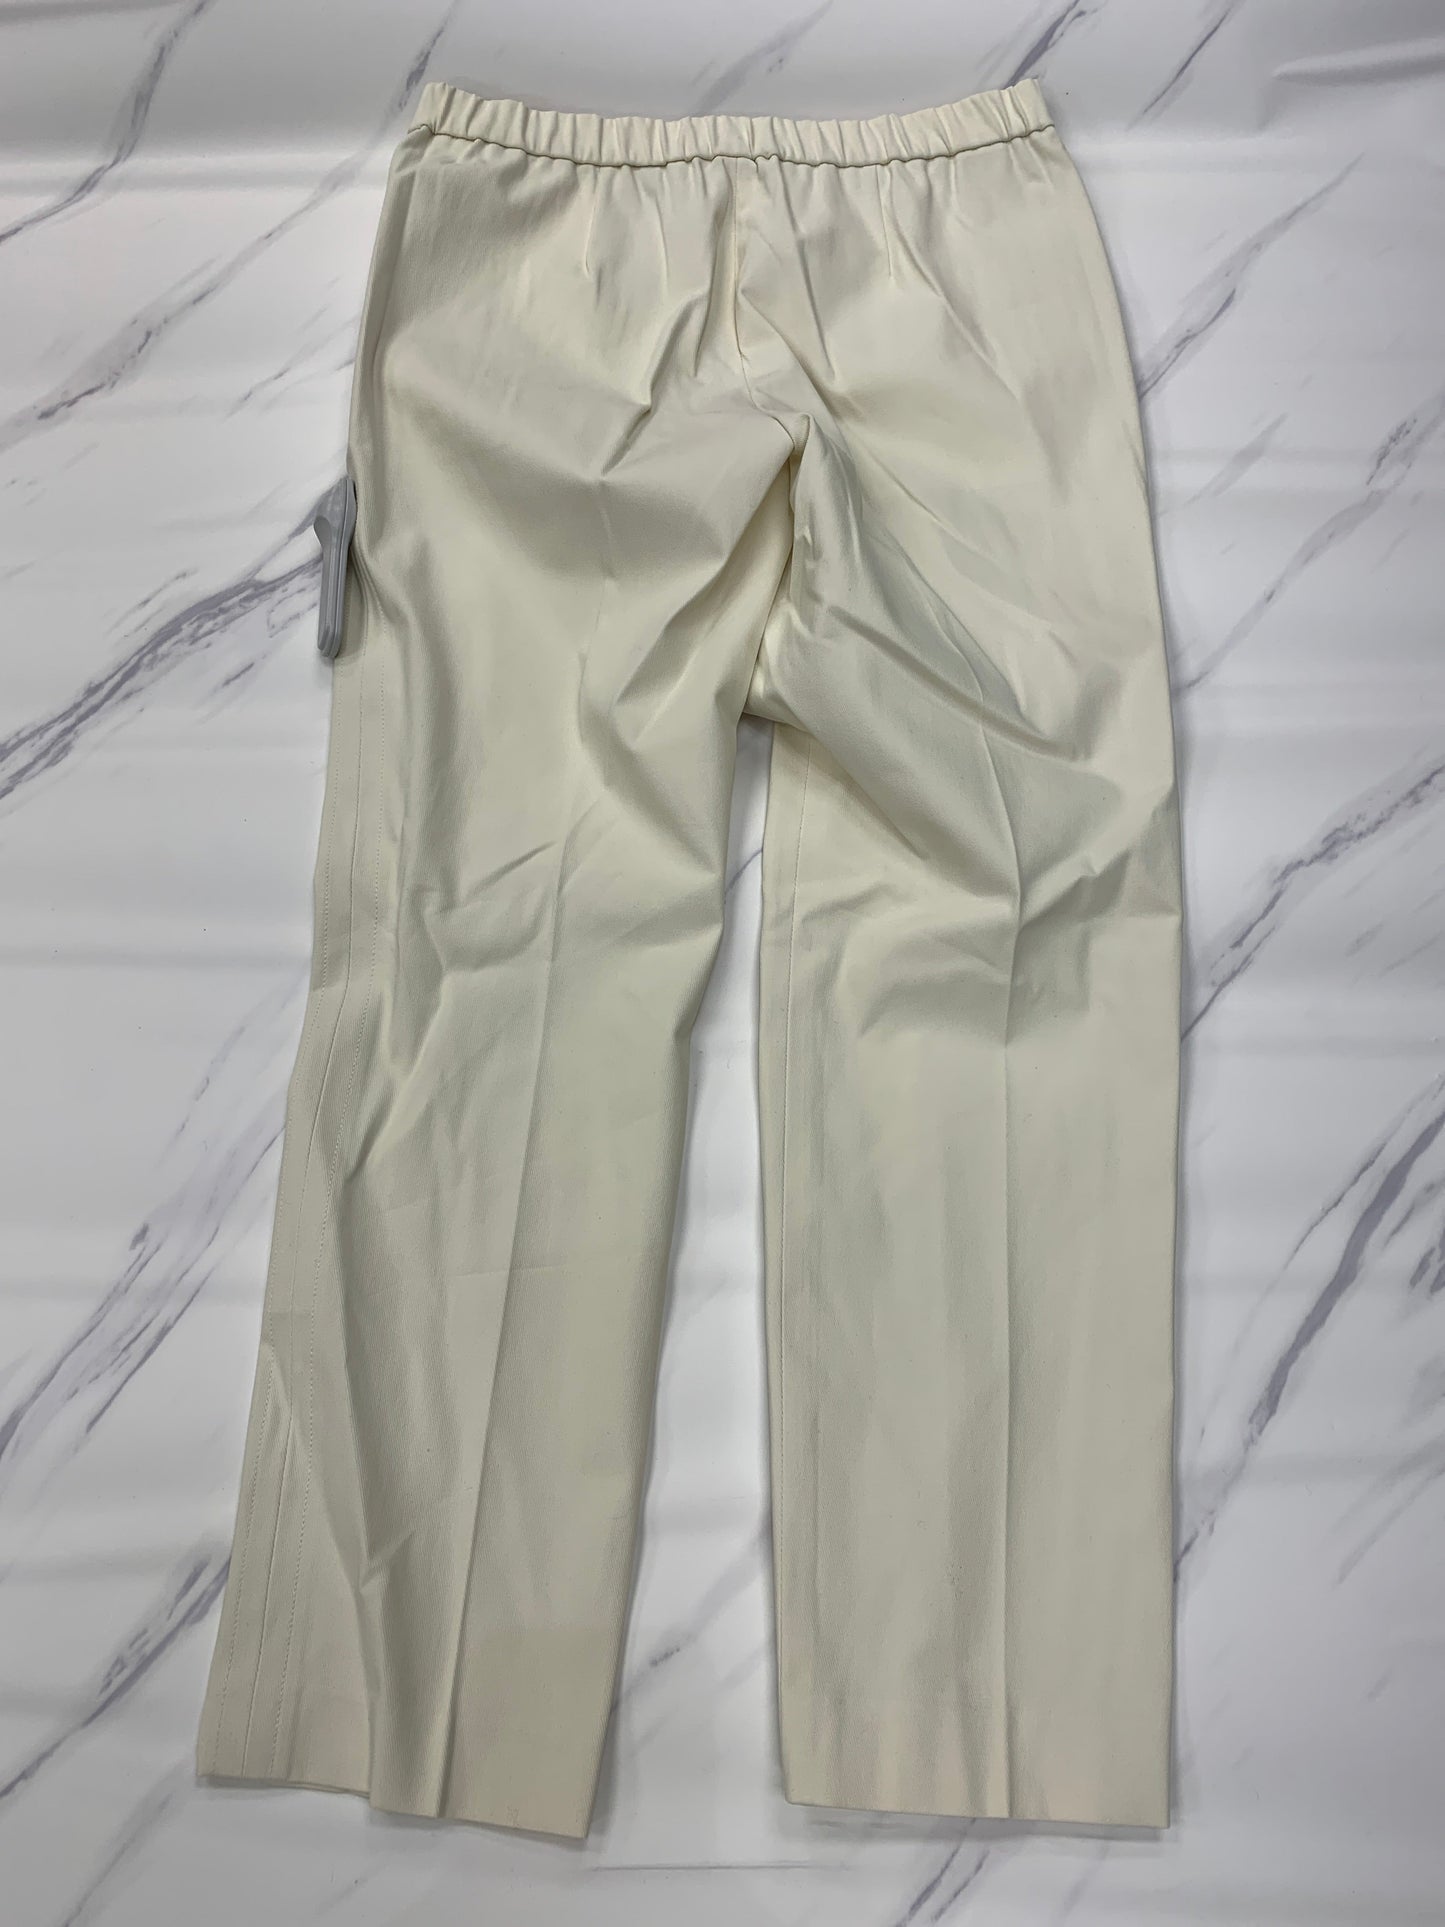 Pants Designer By Theory  Size: 4